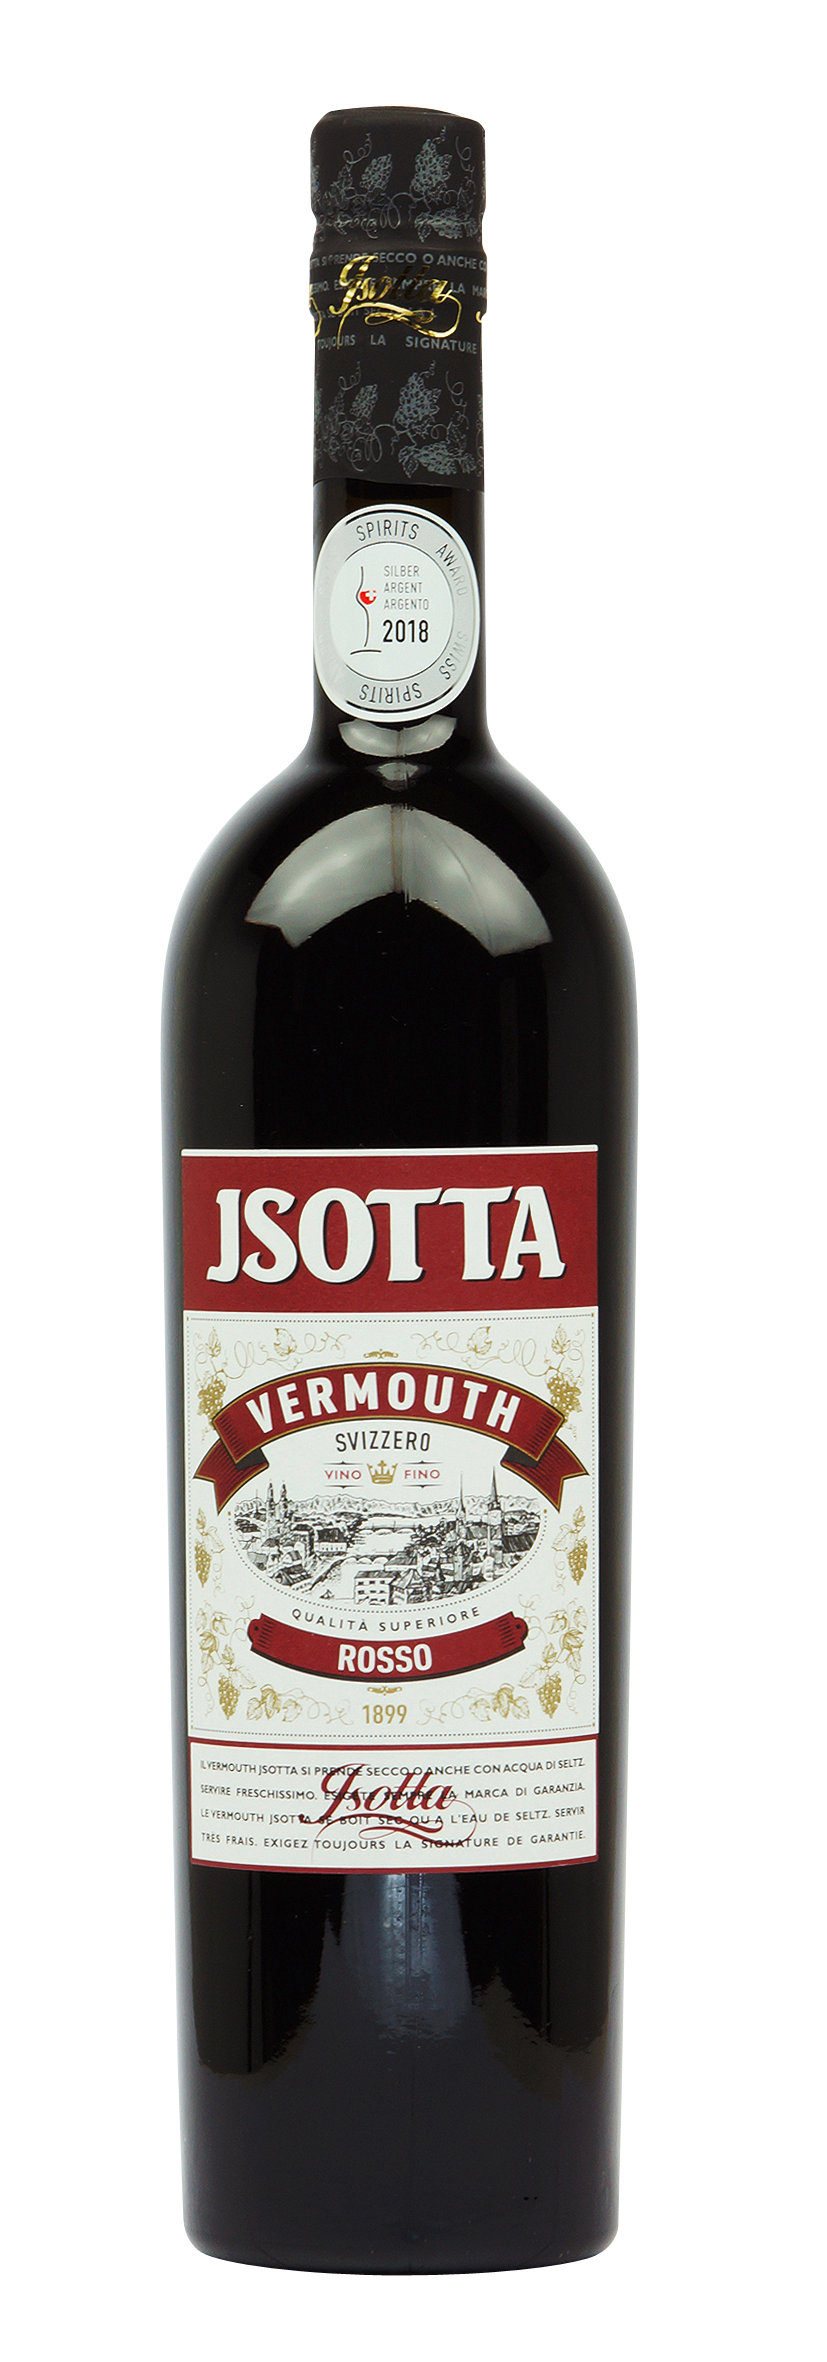 Jsotta Vermouth Rosso 0